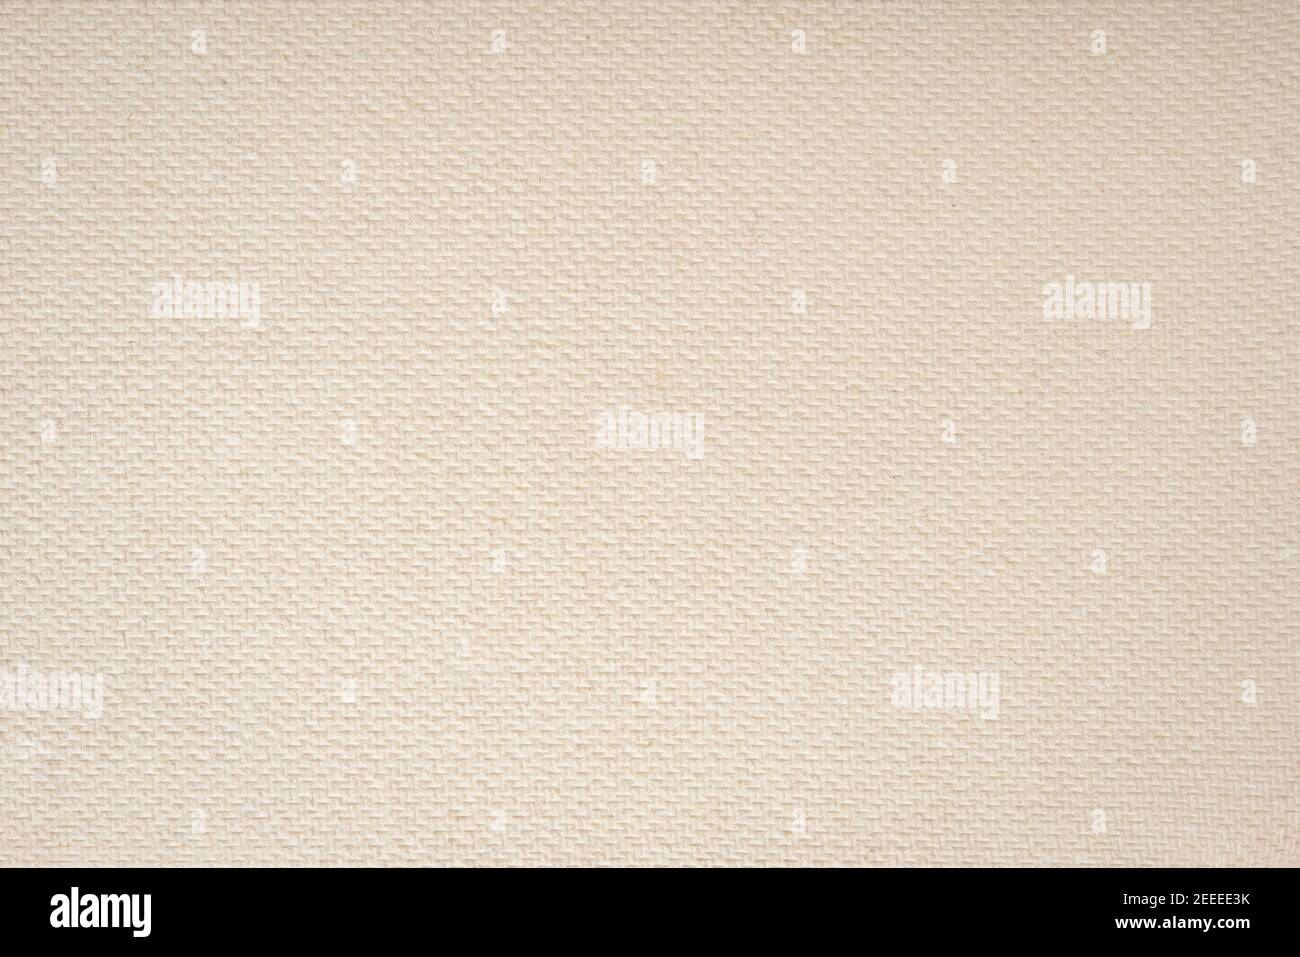 Rough light brown beige paper texture for background Stock Photo